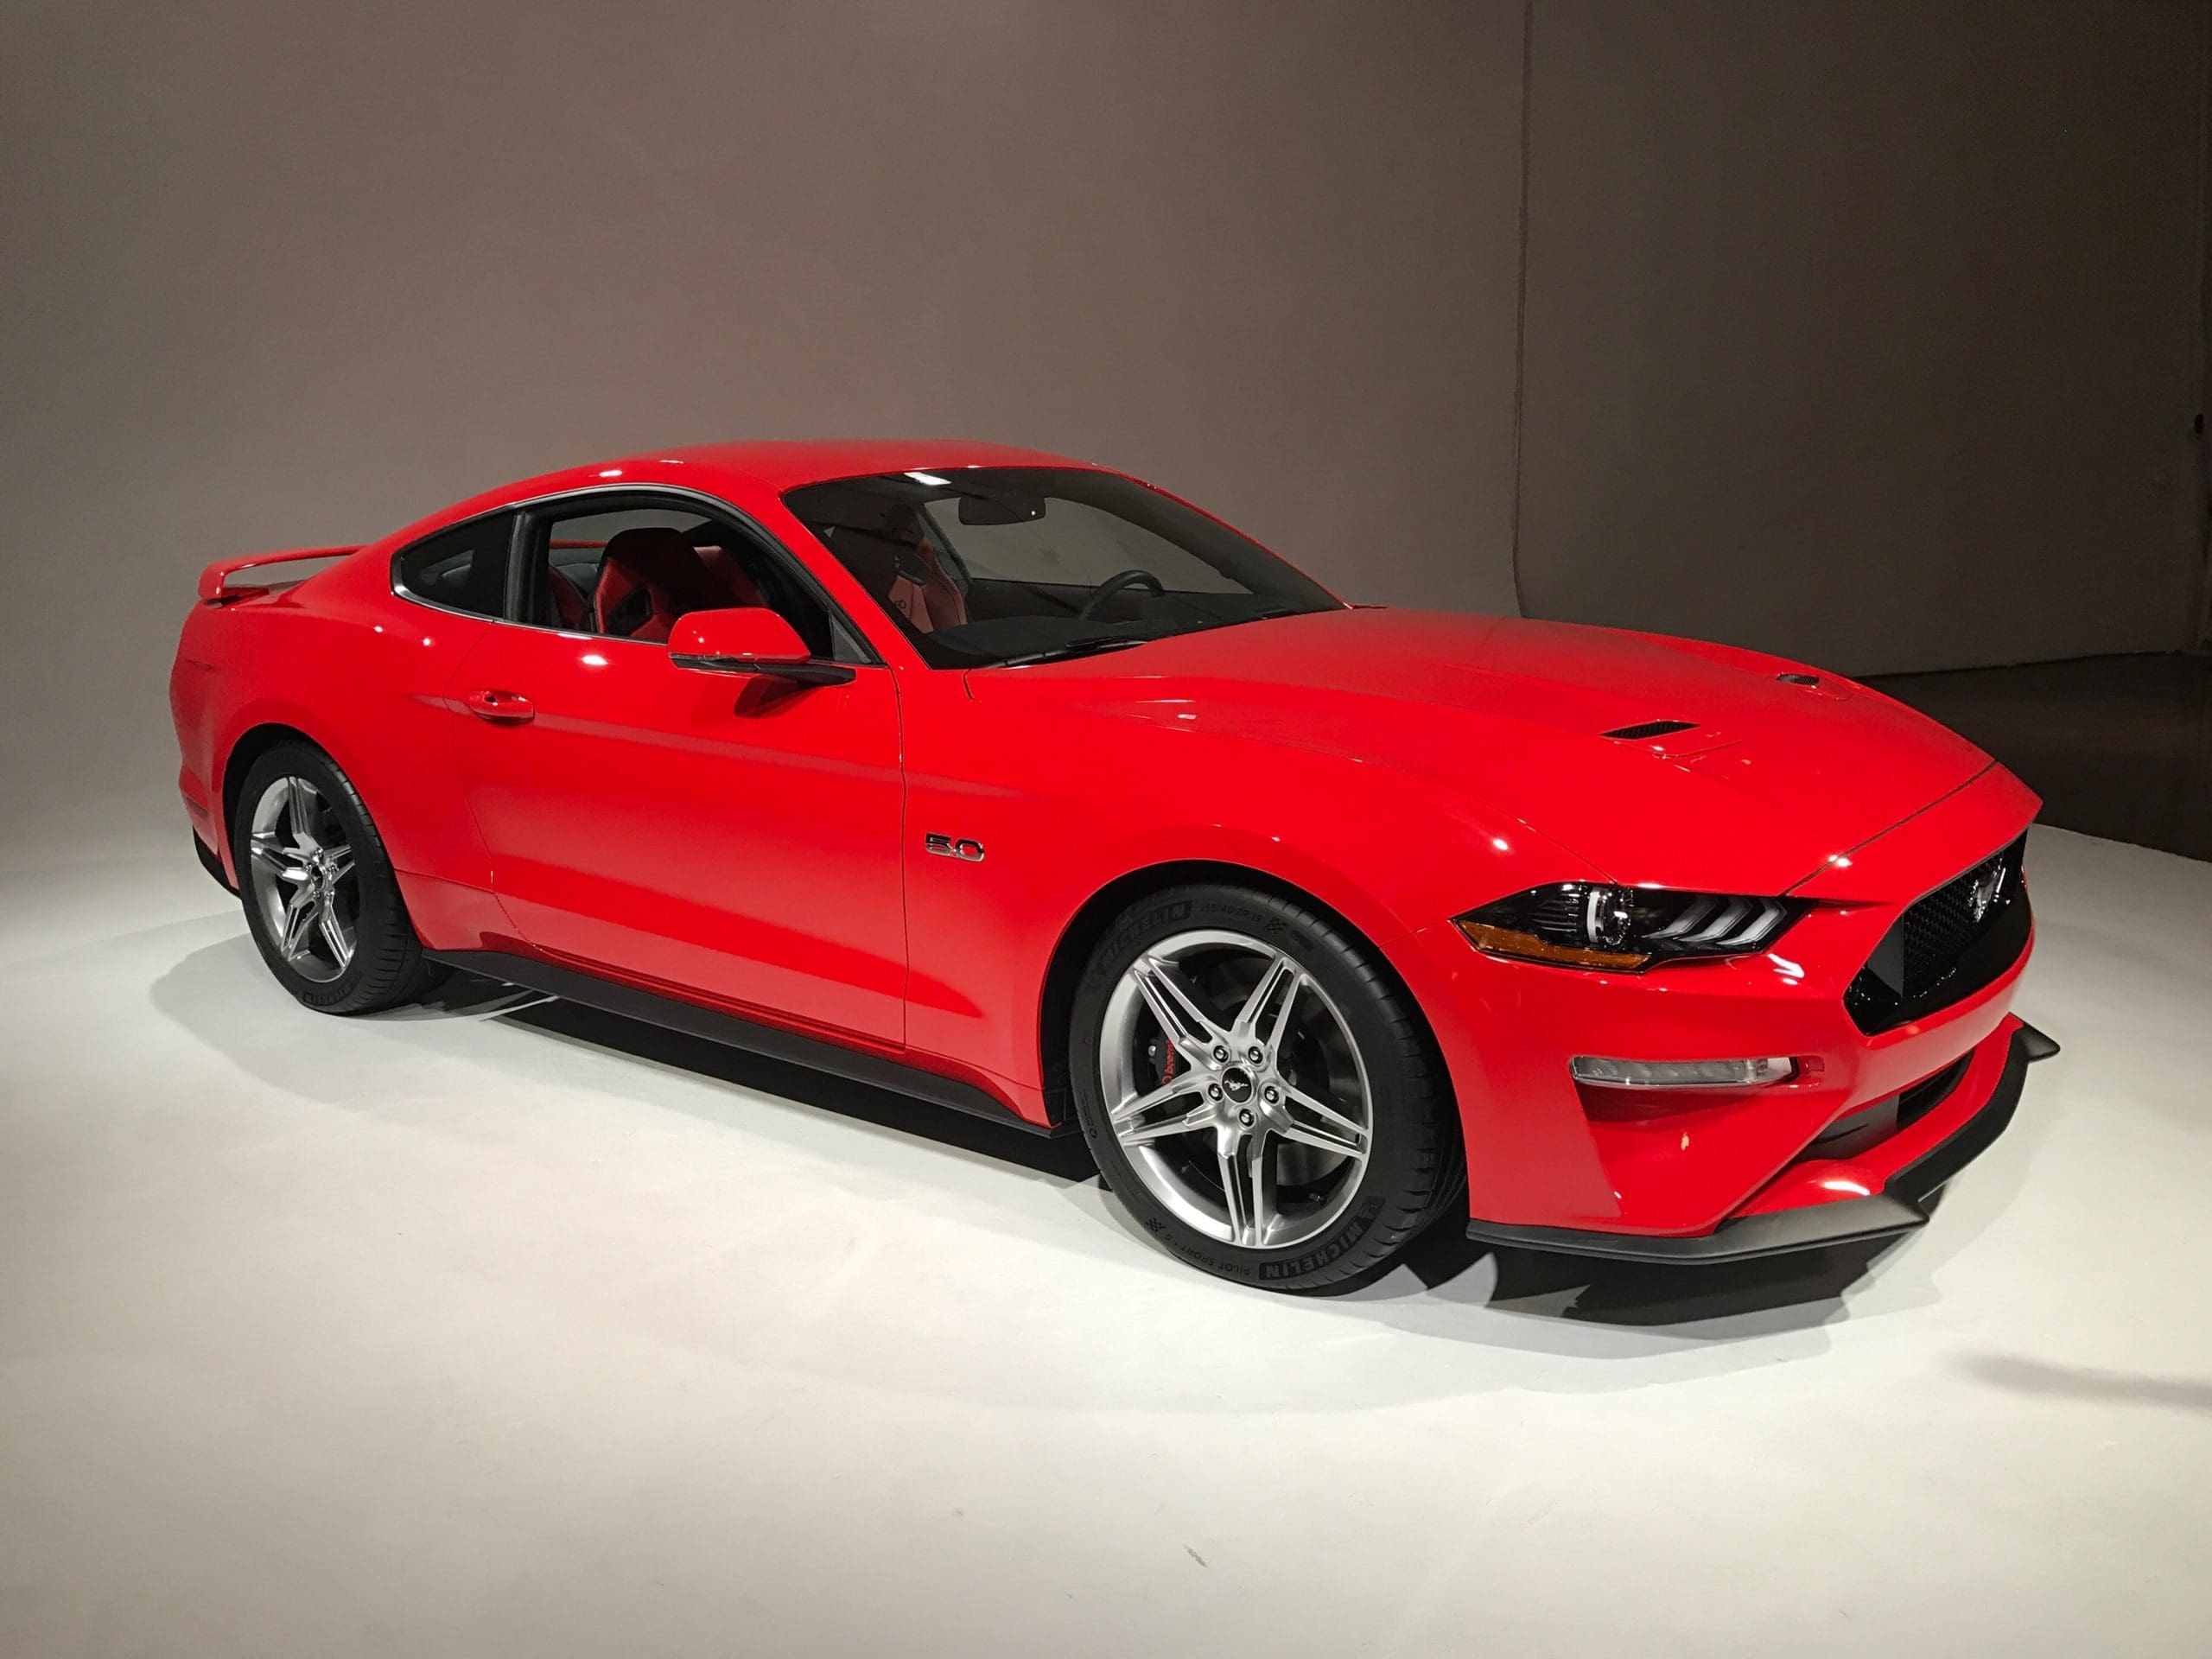 Race Red 2018 Ford Mustang